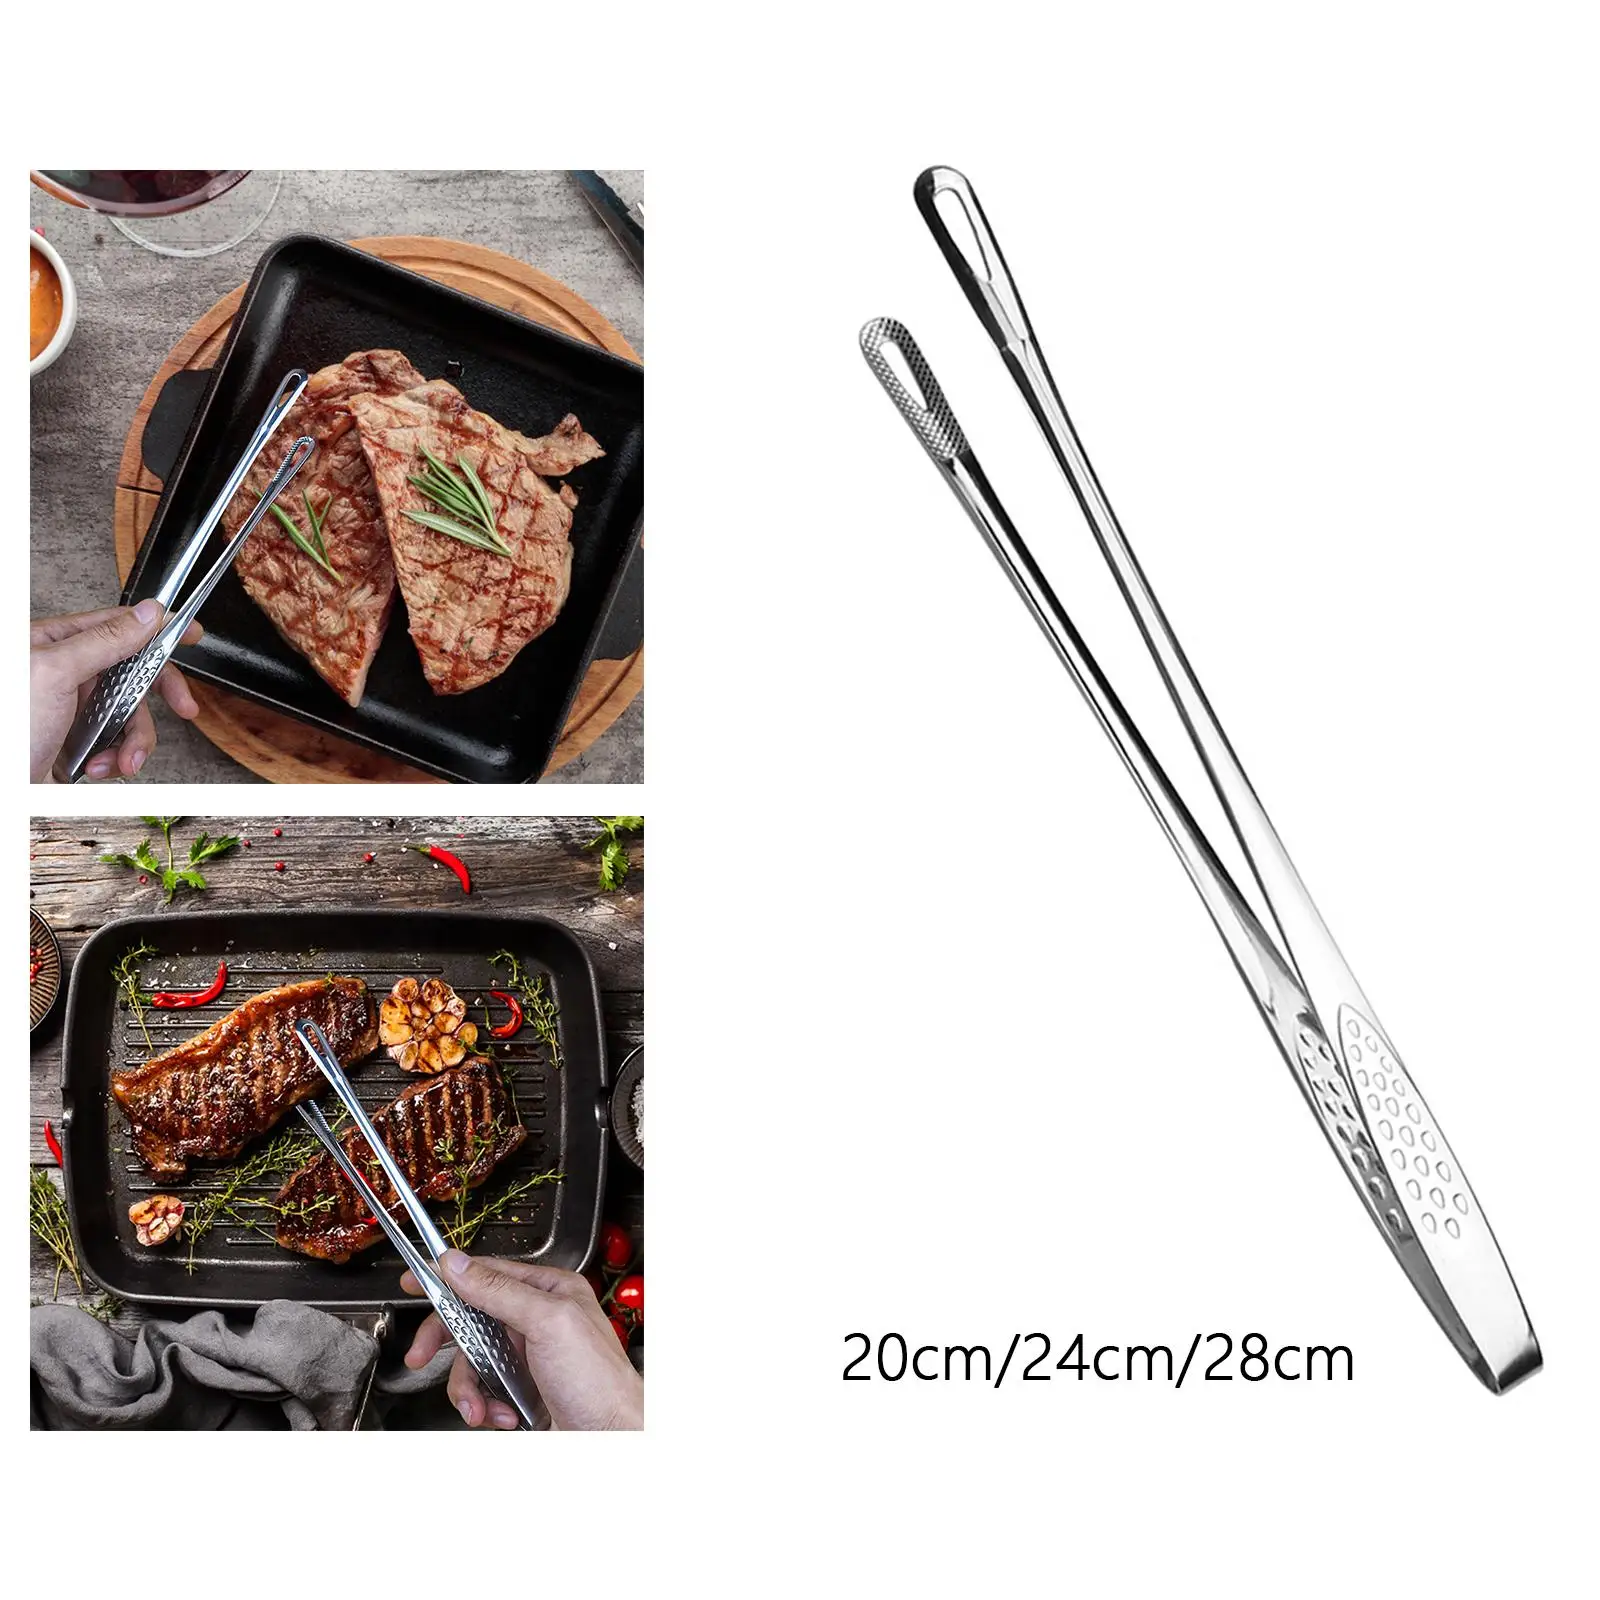 Korean and Japanese BBQ Tongs Tweezer Professional Extra Long Grill Tongs Metal Food Tongs for BBQ Buffet Grilling Turning Food